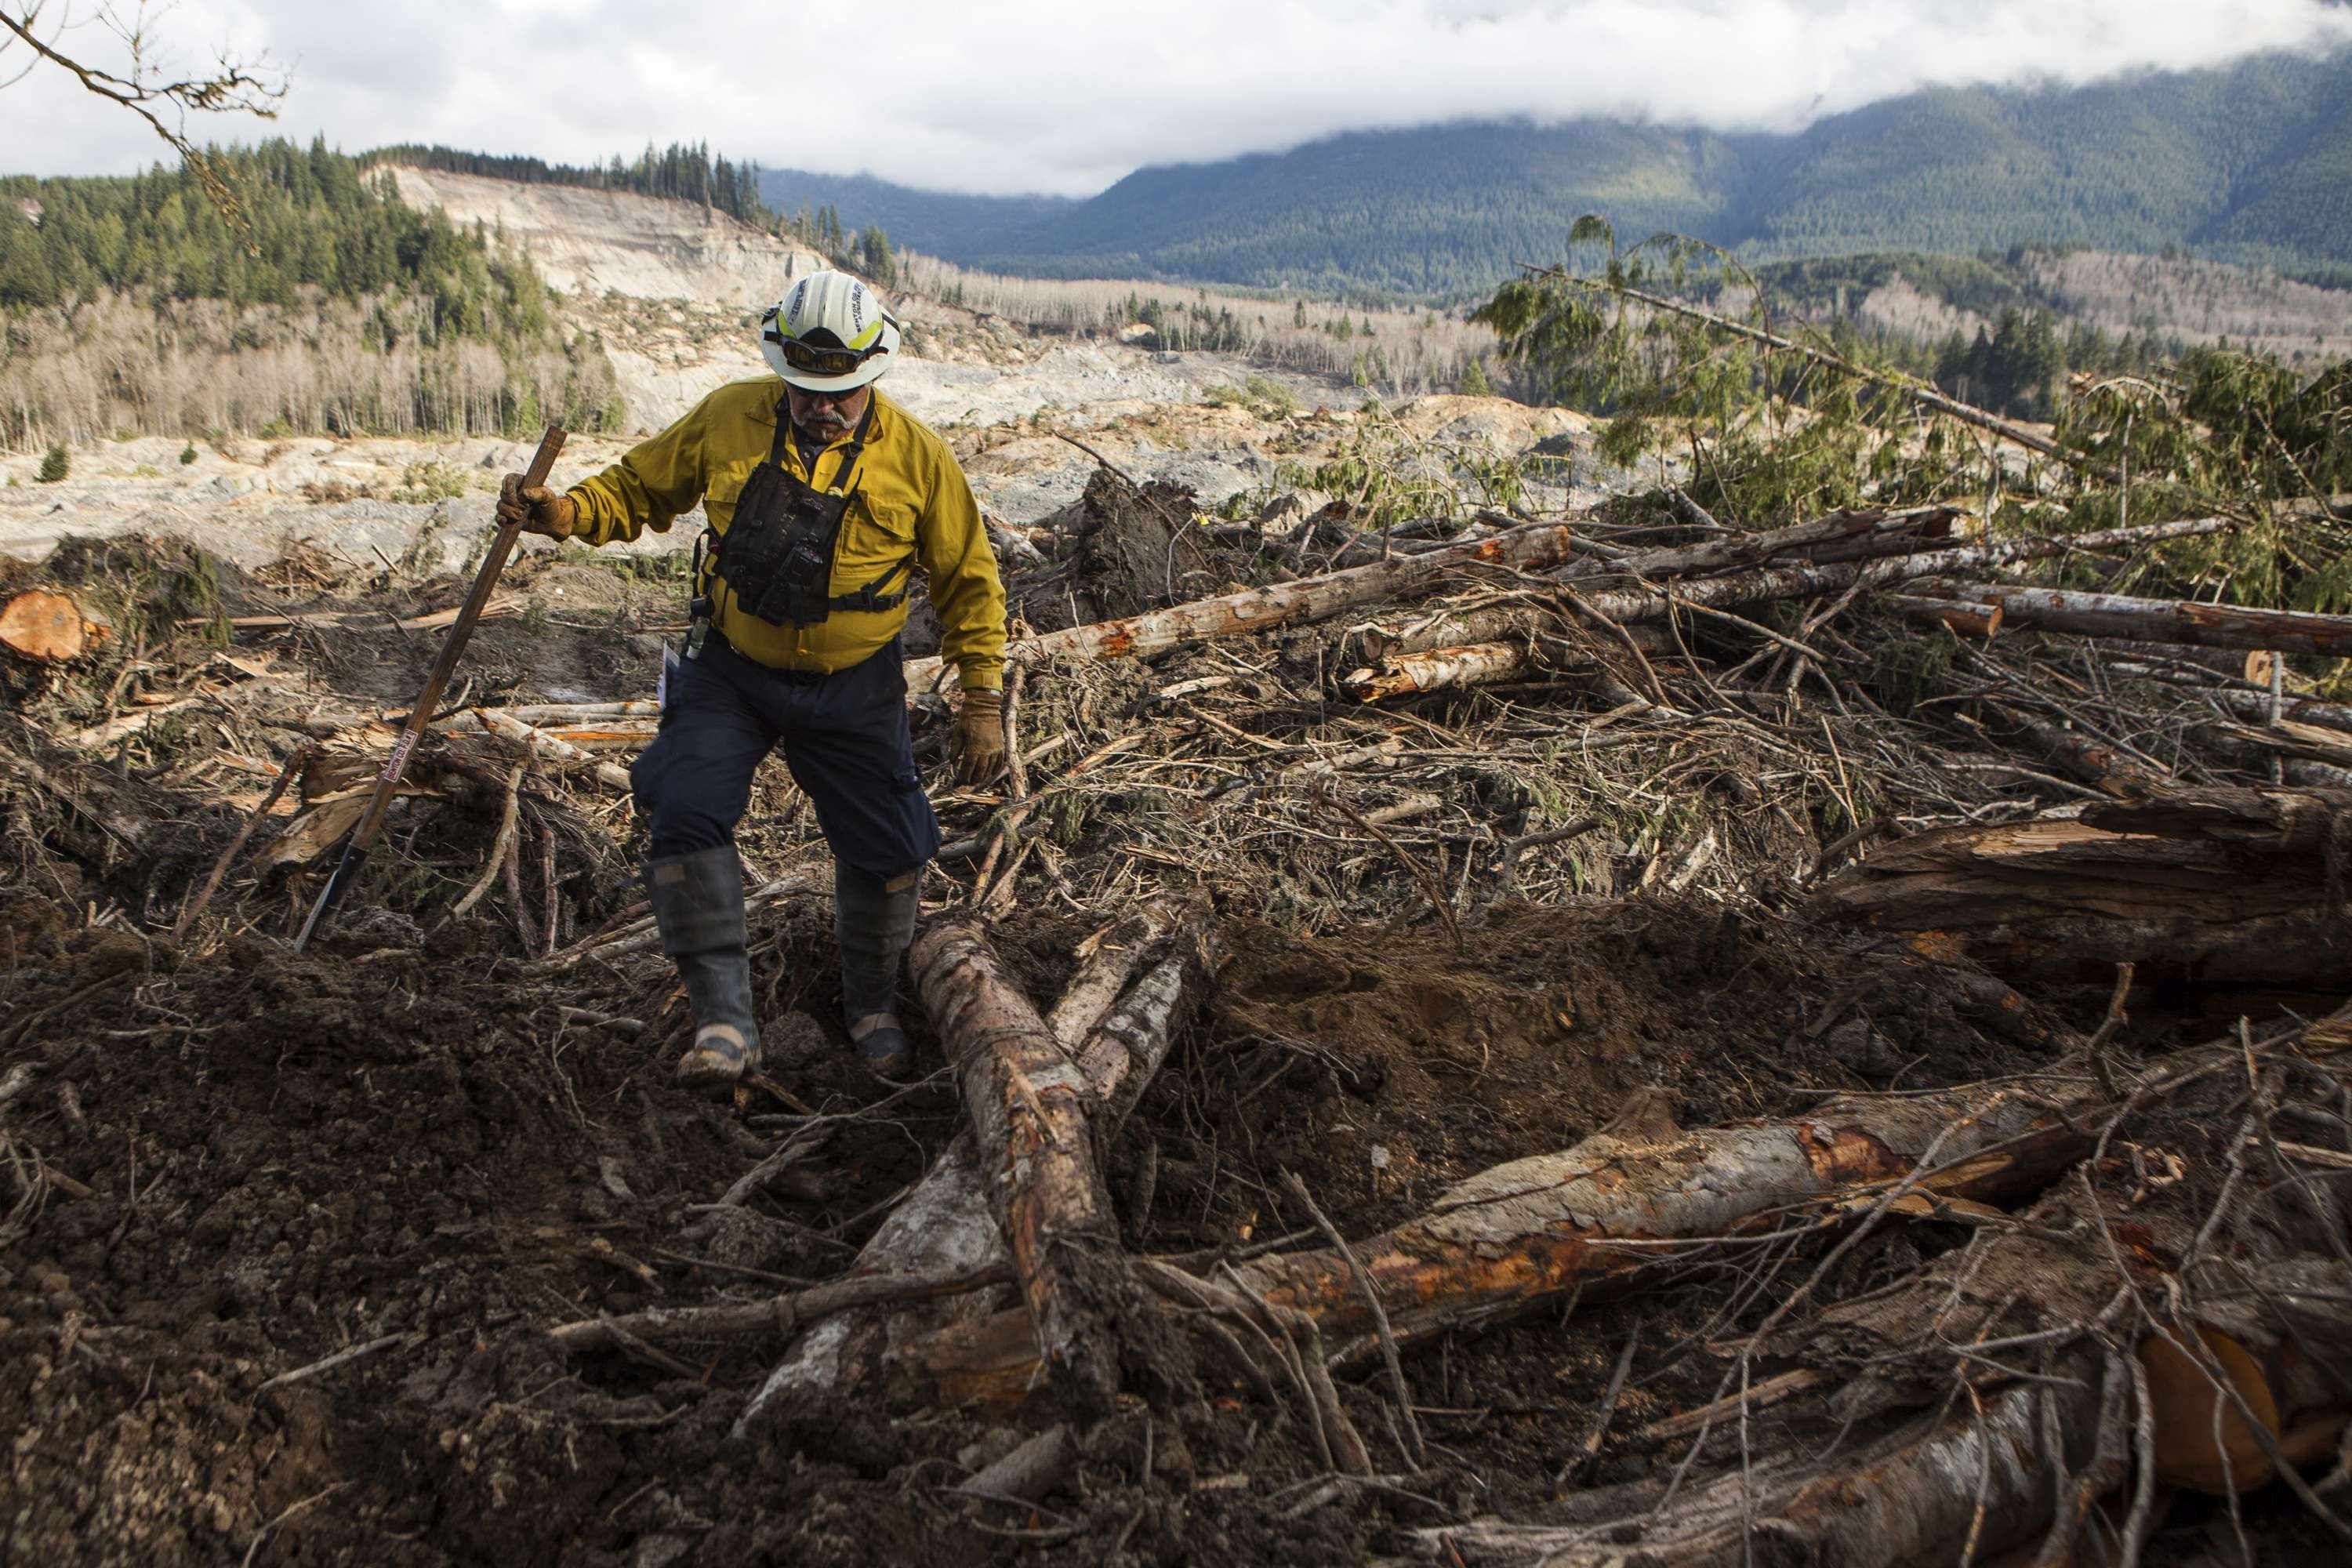 Benton County Assistant Fire Chief Jack Coats makes his way over debris left by a mudslide in Oso, Wash., April 2, 2014. (Max Whittaker&mdash;Reuters)